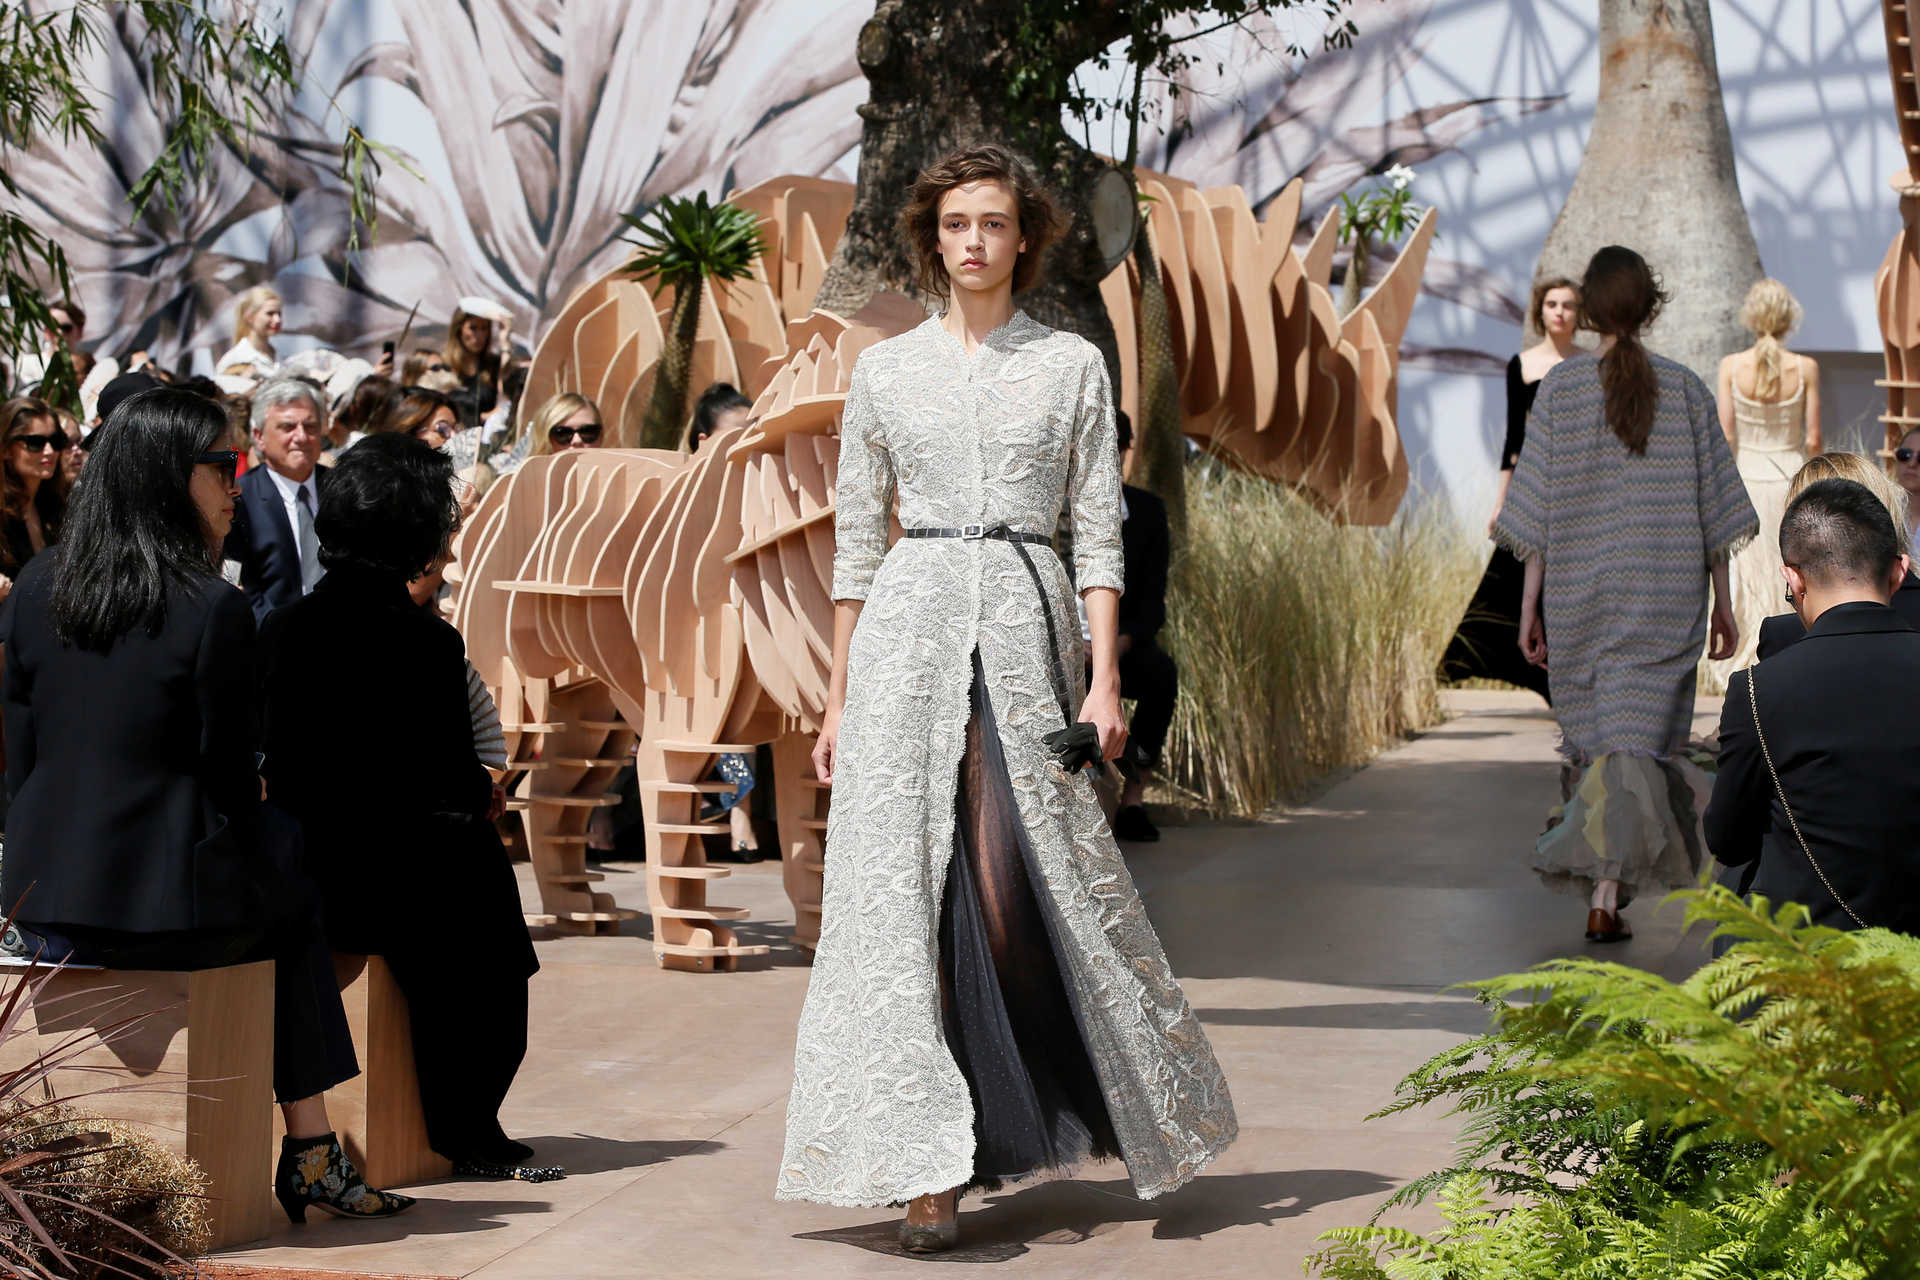 A model presents a creation by Italian designer Maria Grazia Chiuri as part of her Haute Couture Fall/Winter 2017/2018 collection for fashion house Dior in Paris